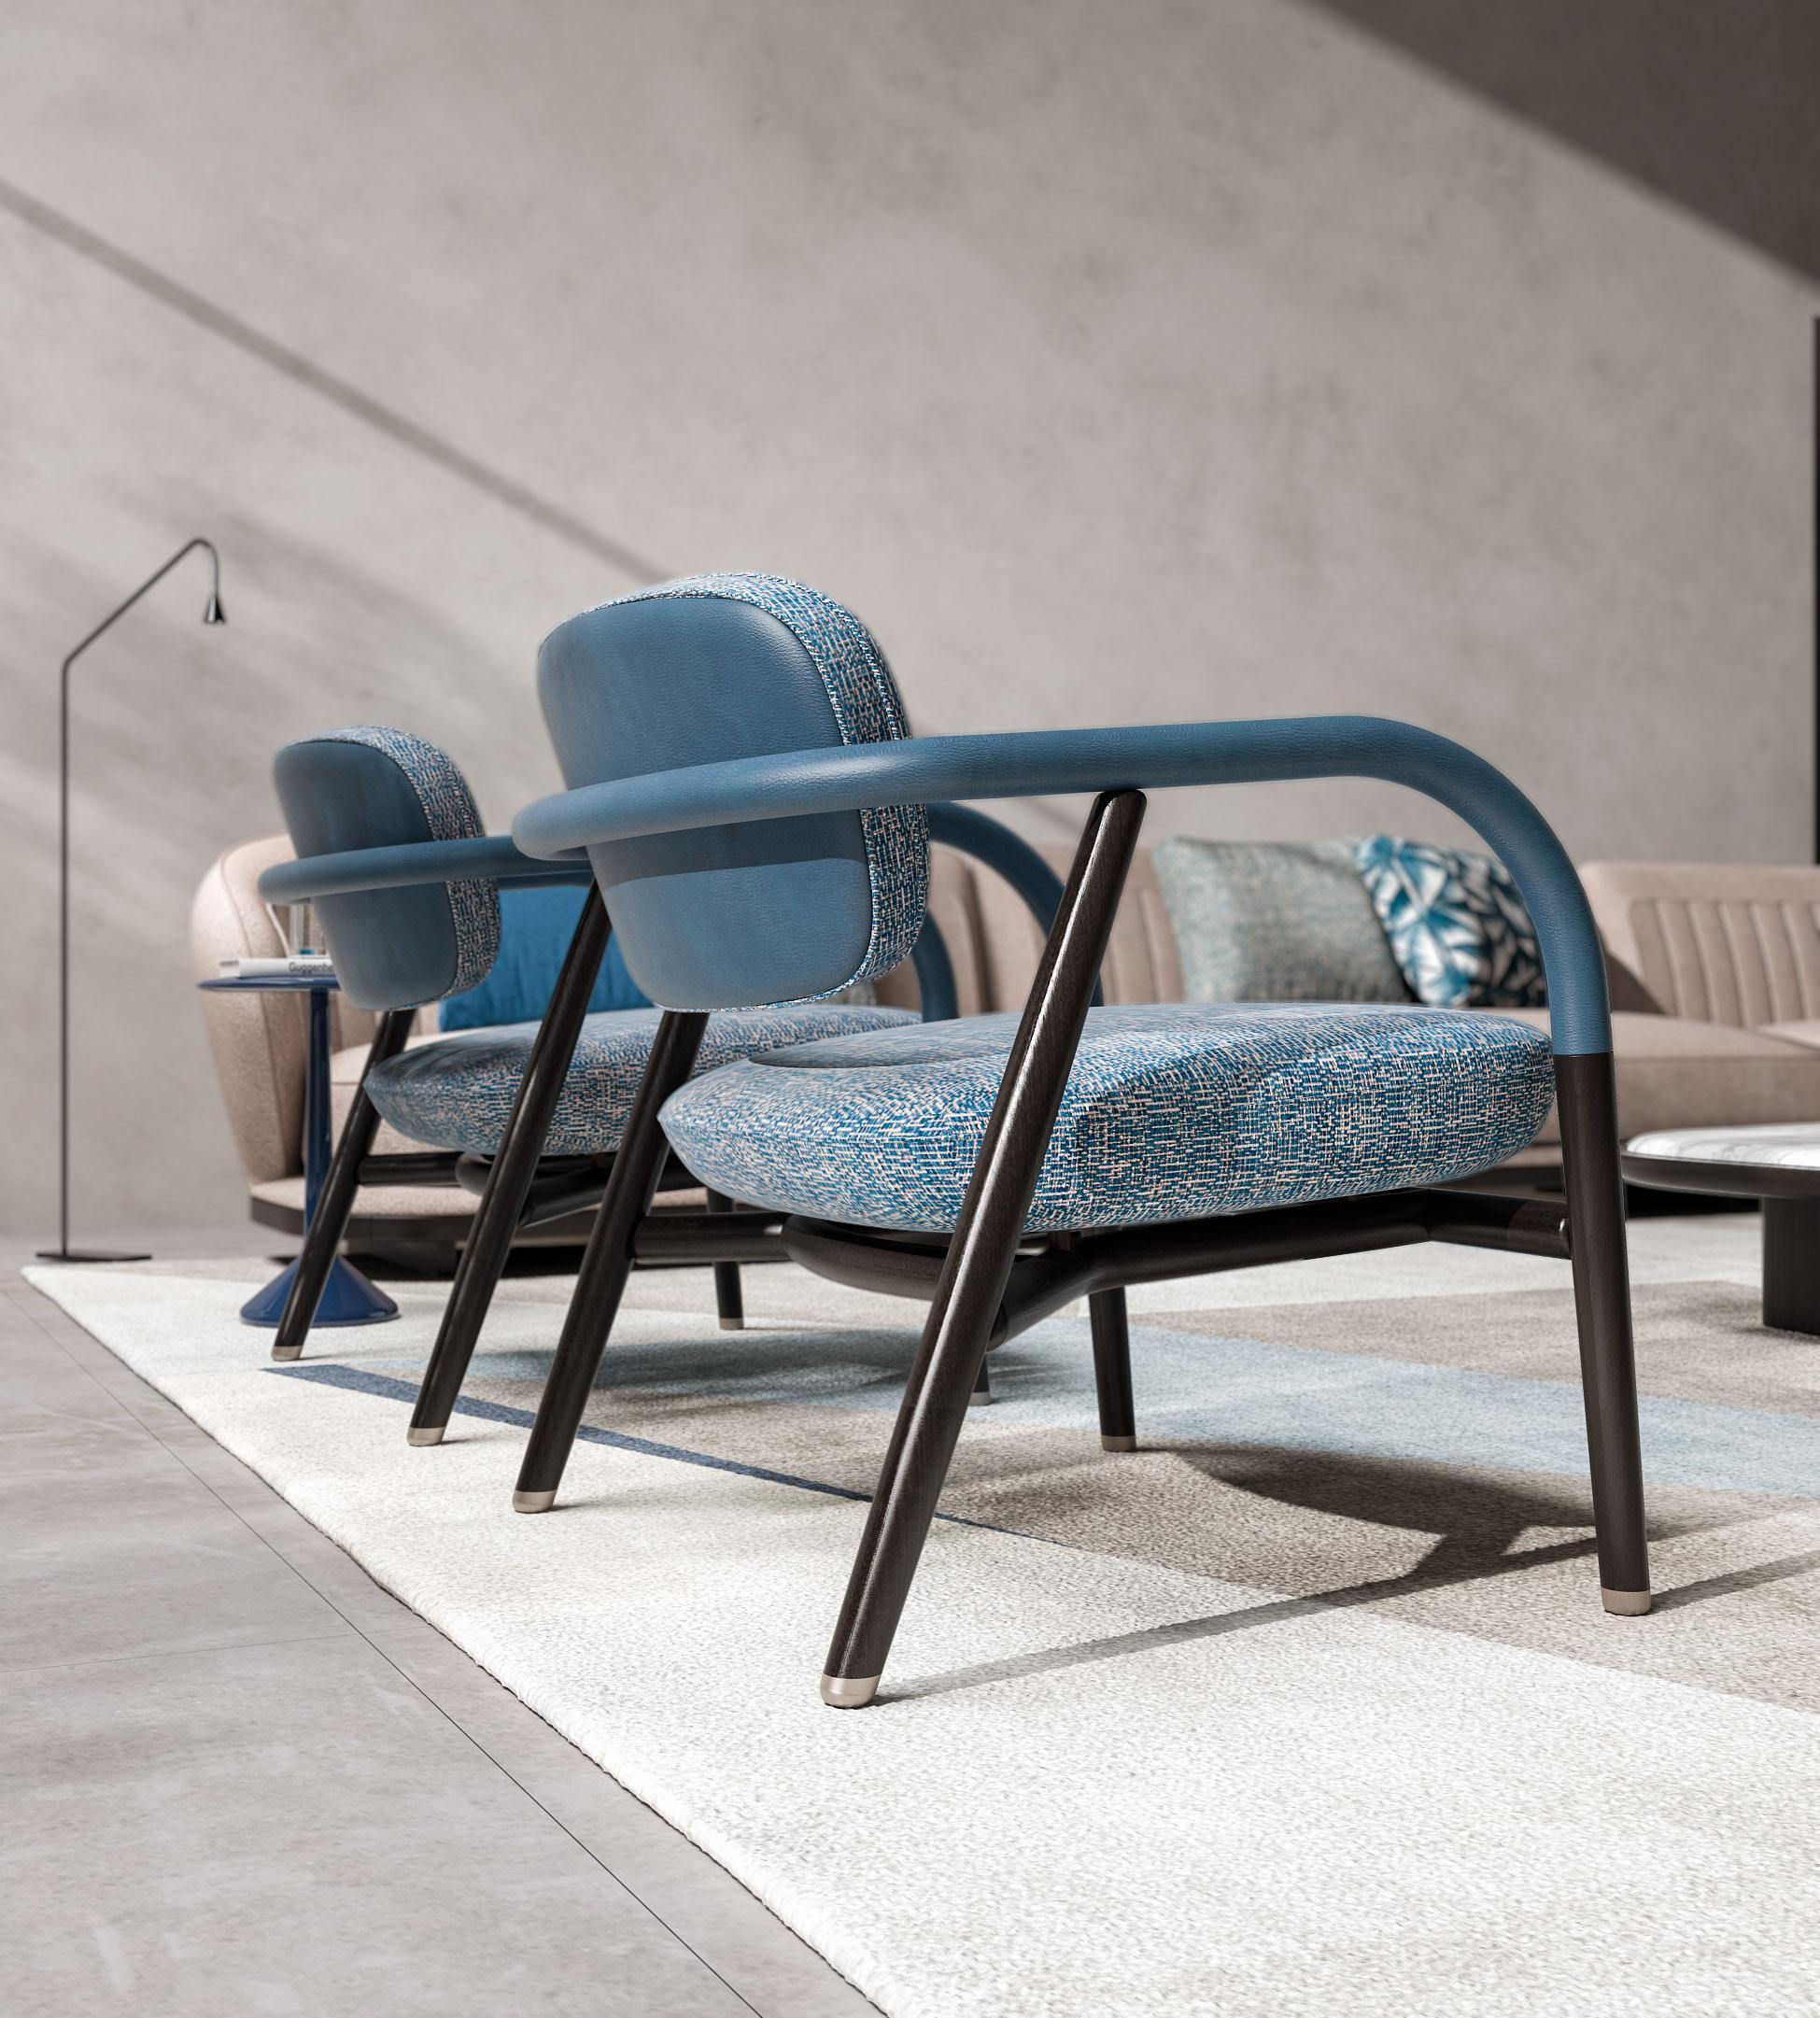 The Maiori occasional armchair is a new way of decorating an interior environment.
Its smooth and tapering silhouette allows it to create harmony in a brand-new or existing ambience.
The refined and sapient use of the leather and the fabric gives